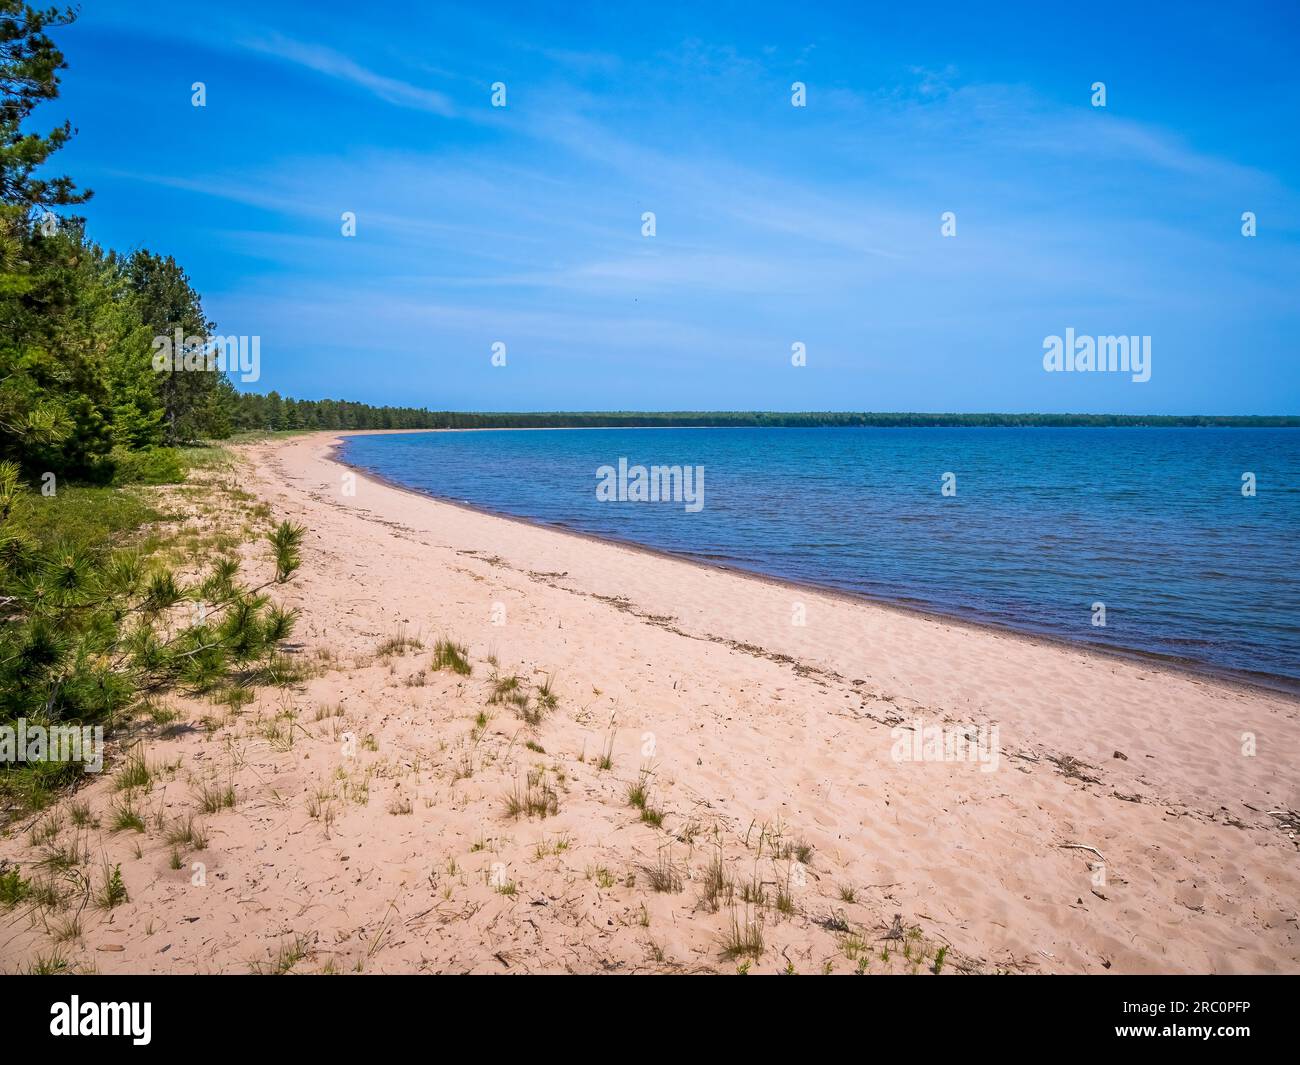 Lake Superior beach in Big Bay State Park on Madeline Island in the Apostle Islands National Lakeshore in Wisconsin USA Stock Photo